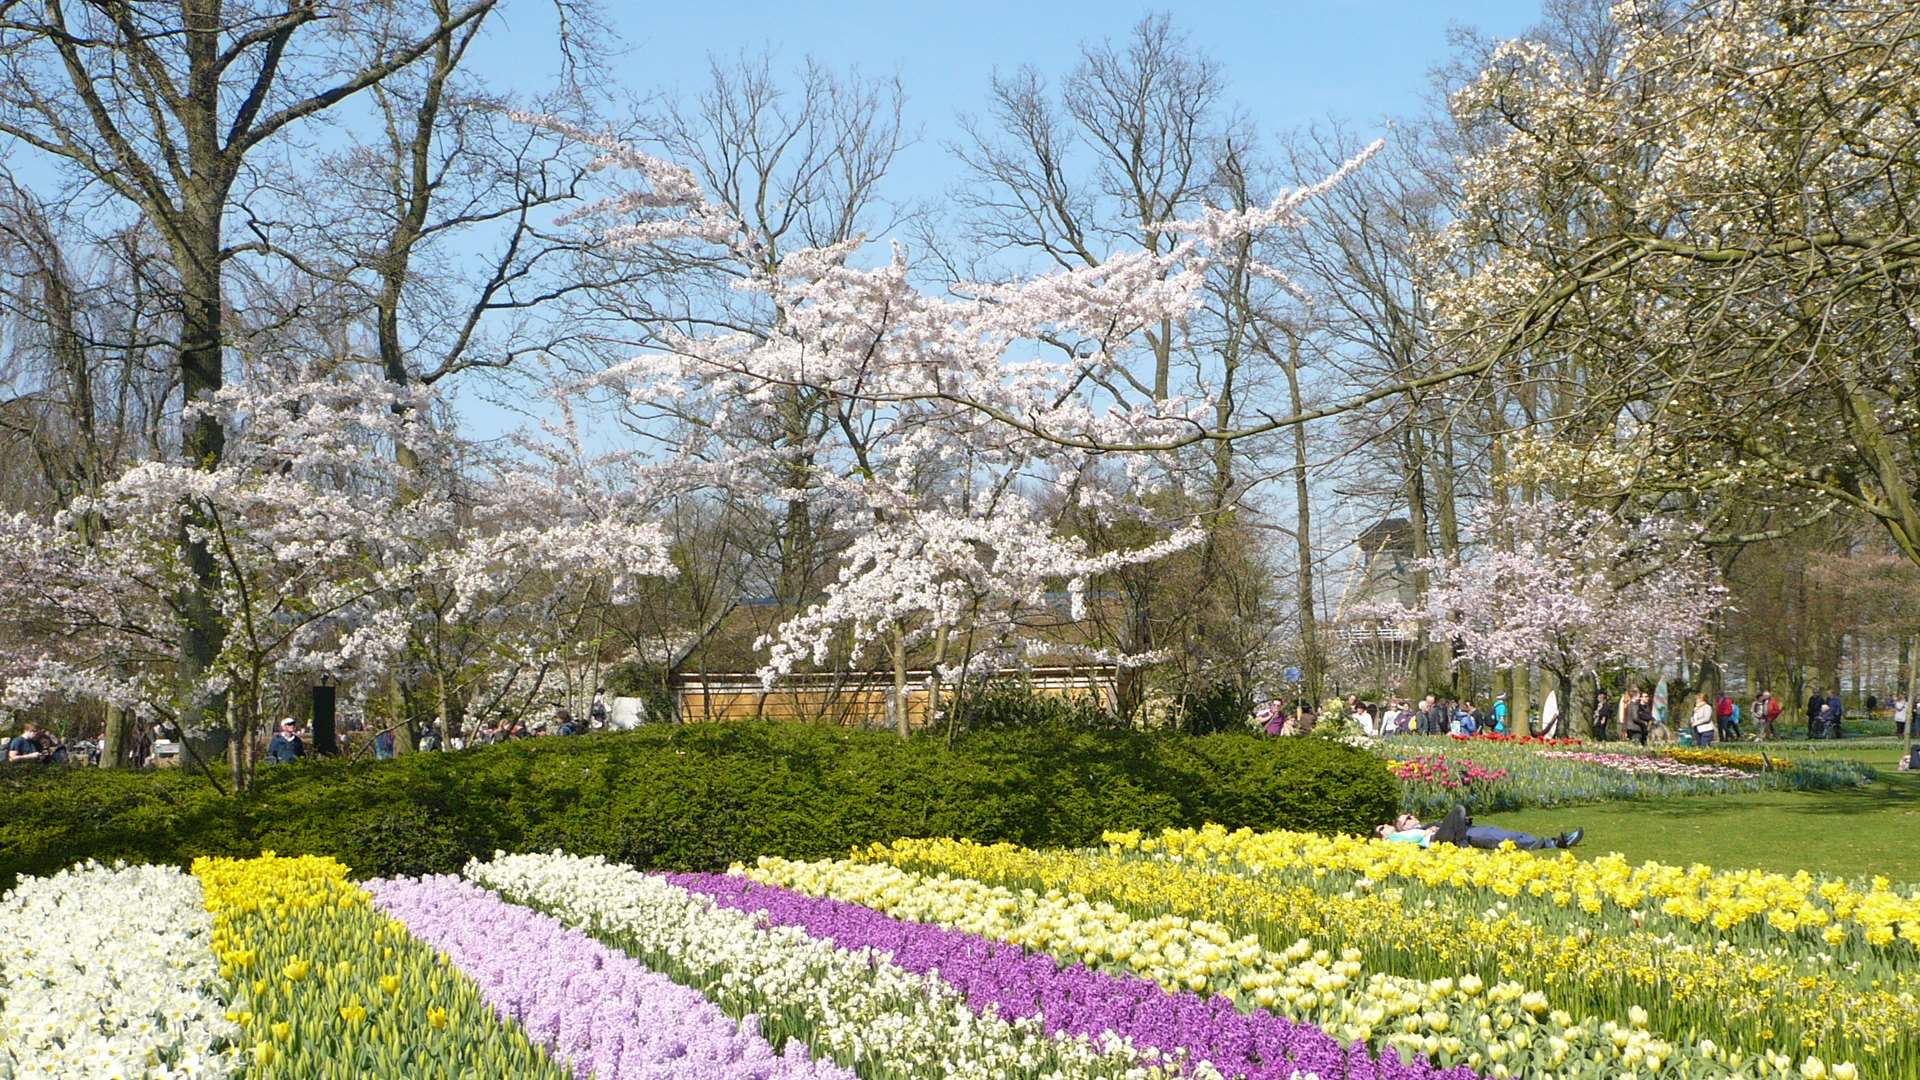 The world-famous Keukenhof flower festival has more than seven million tulips, daffodils and hyacinths on show between March and May